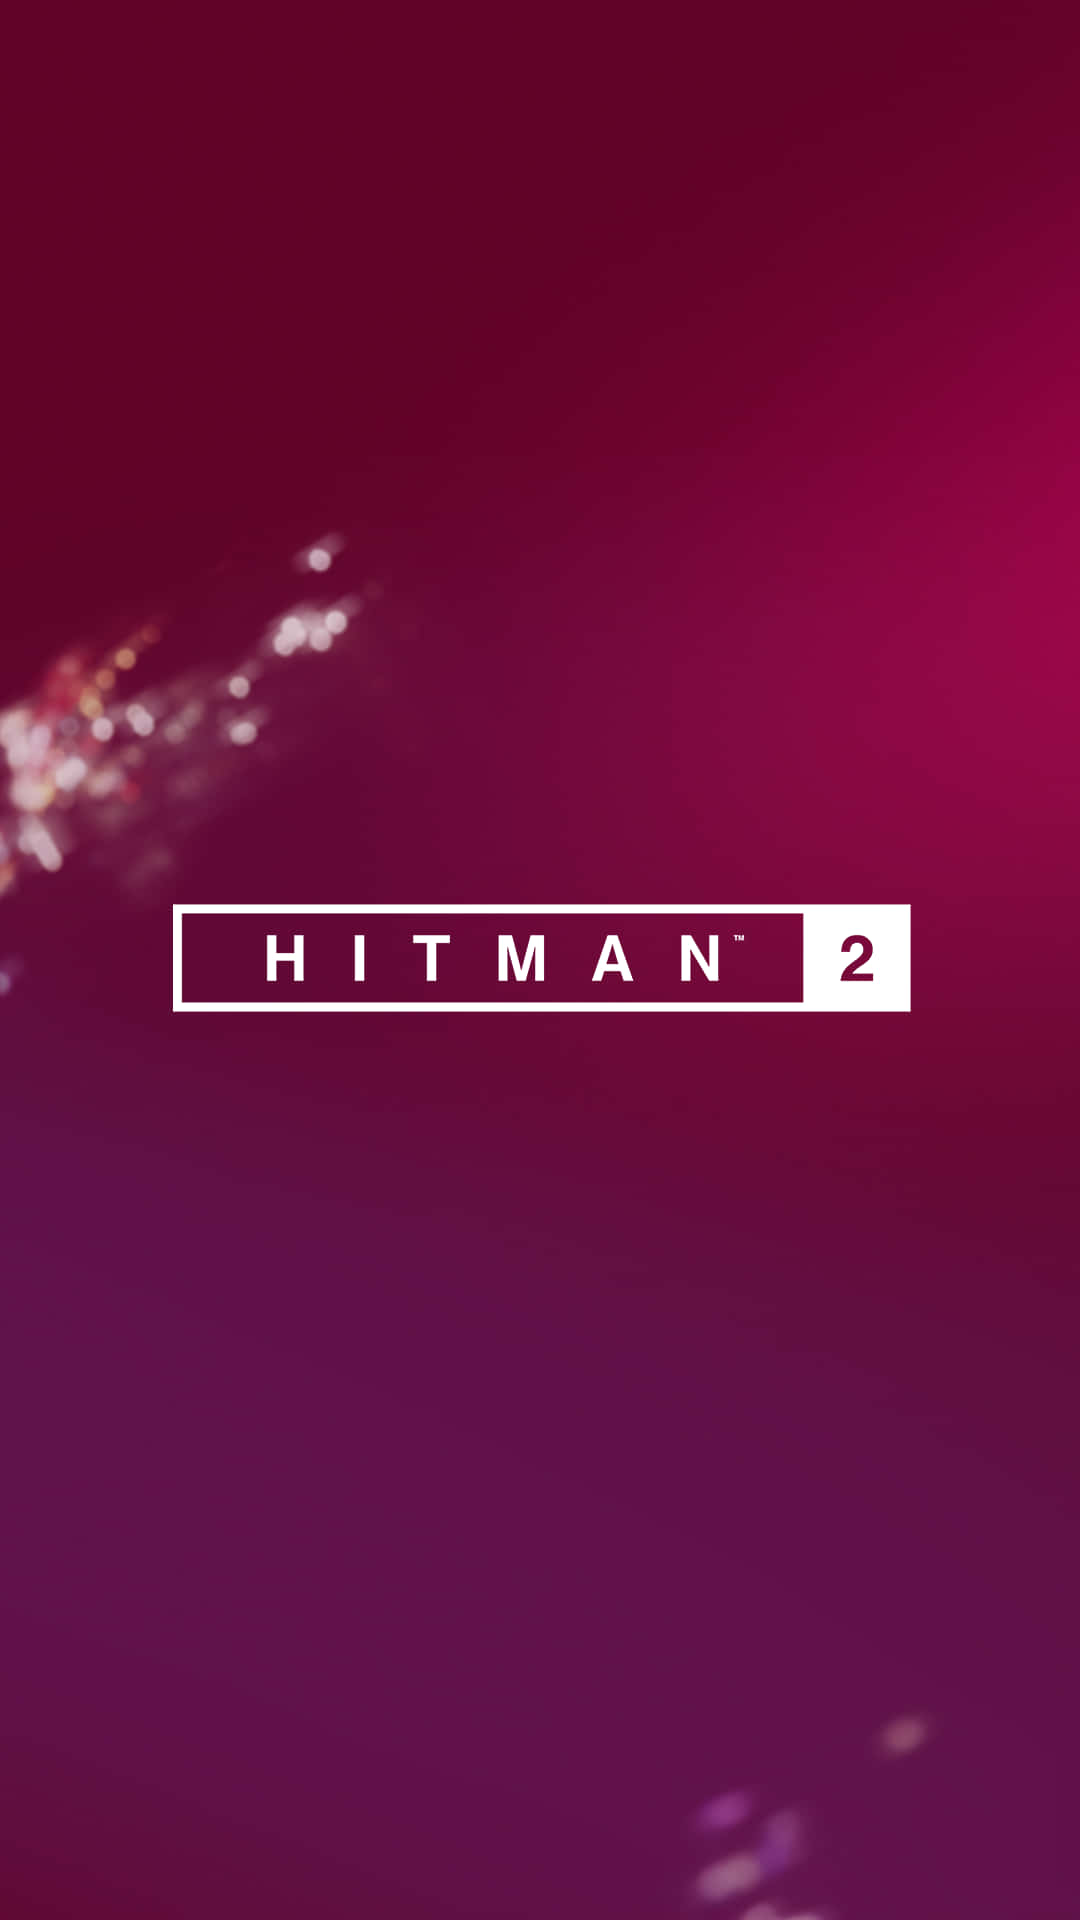 Best Hitman 2 - Embark on an exhilarating journey of stealth and ambush as Agent 47